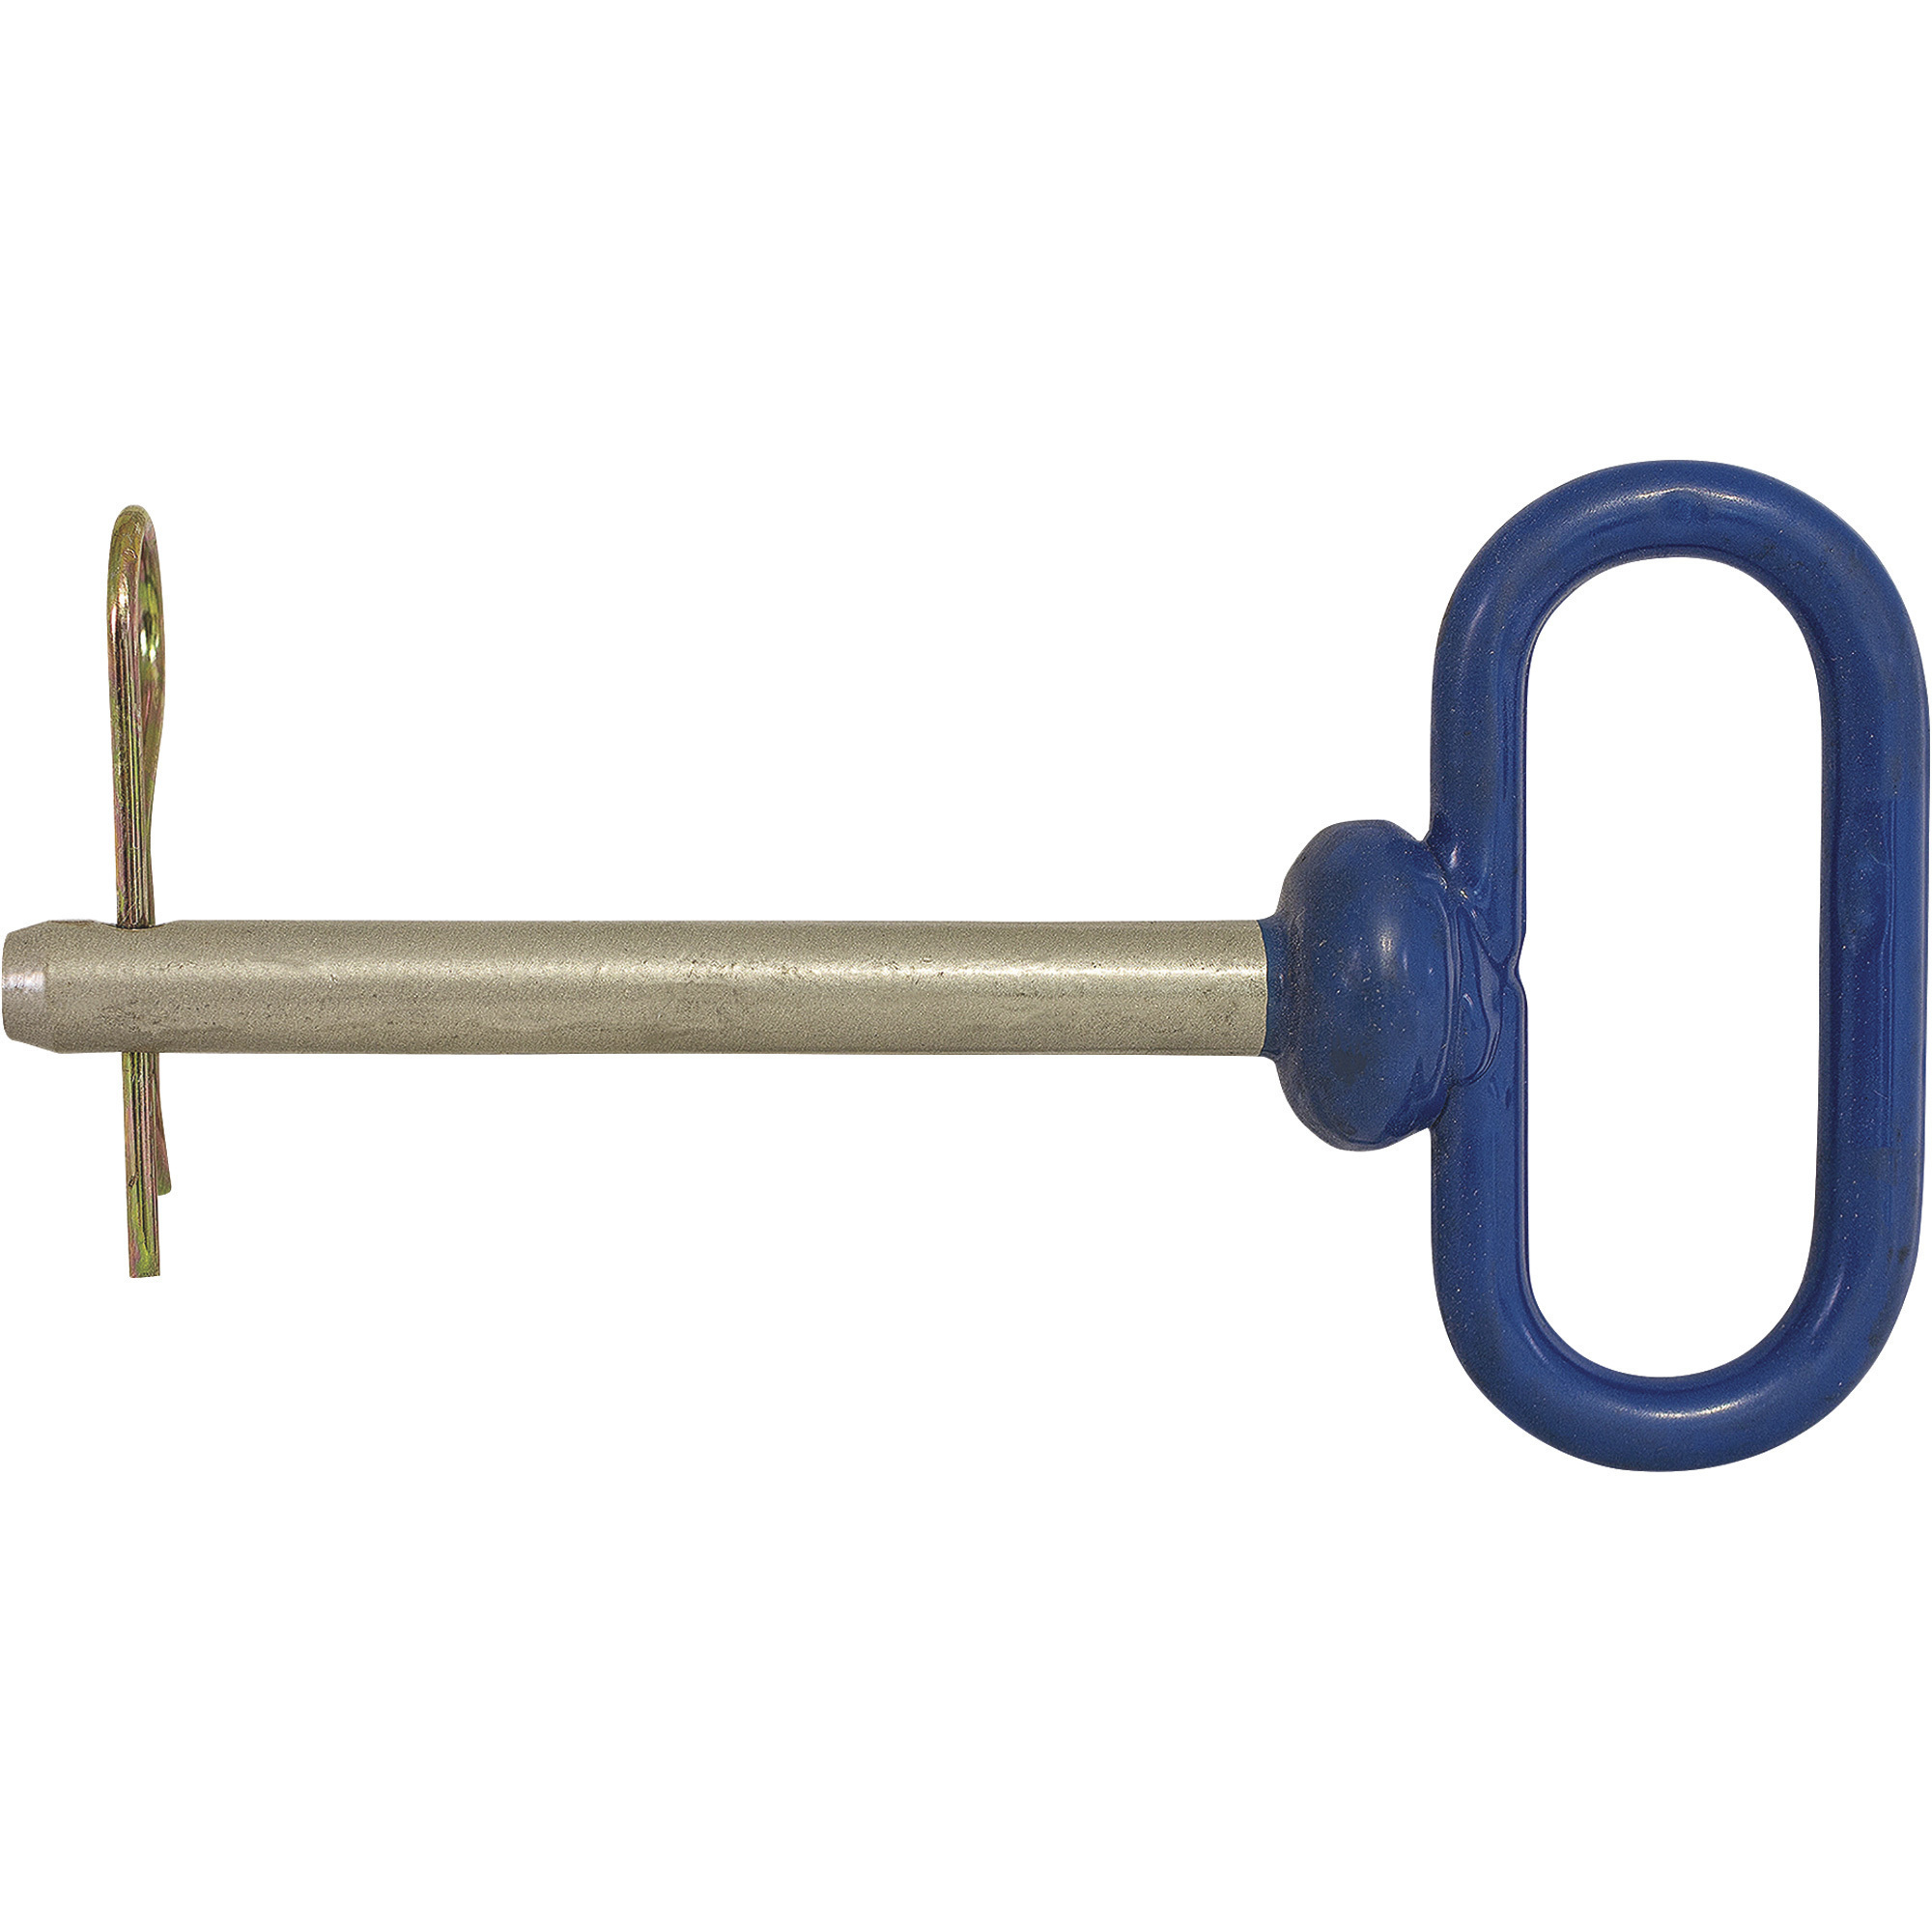 Buyers Products Steel Hitch Pin with Blue Poly-Coated Handle, 1Inch Diameter x 4 1/2Inch Usable Length, Model # 66127